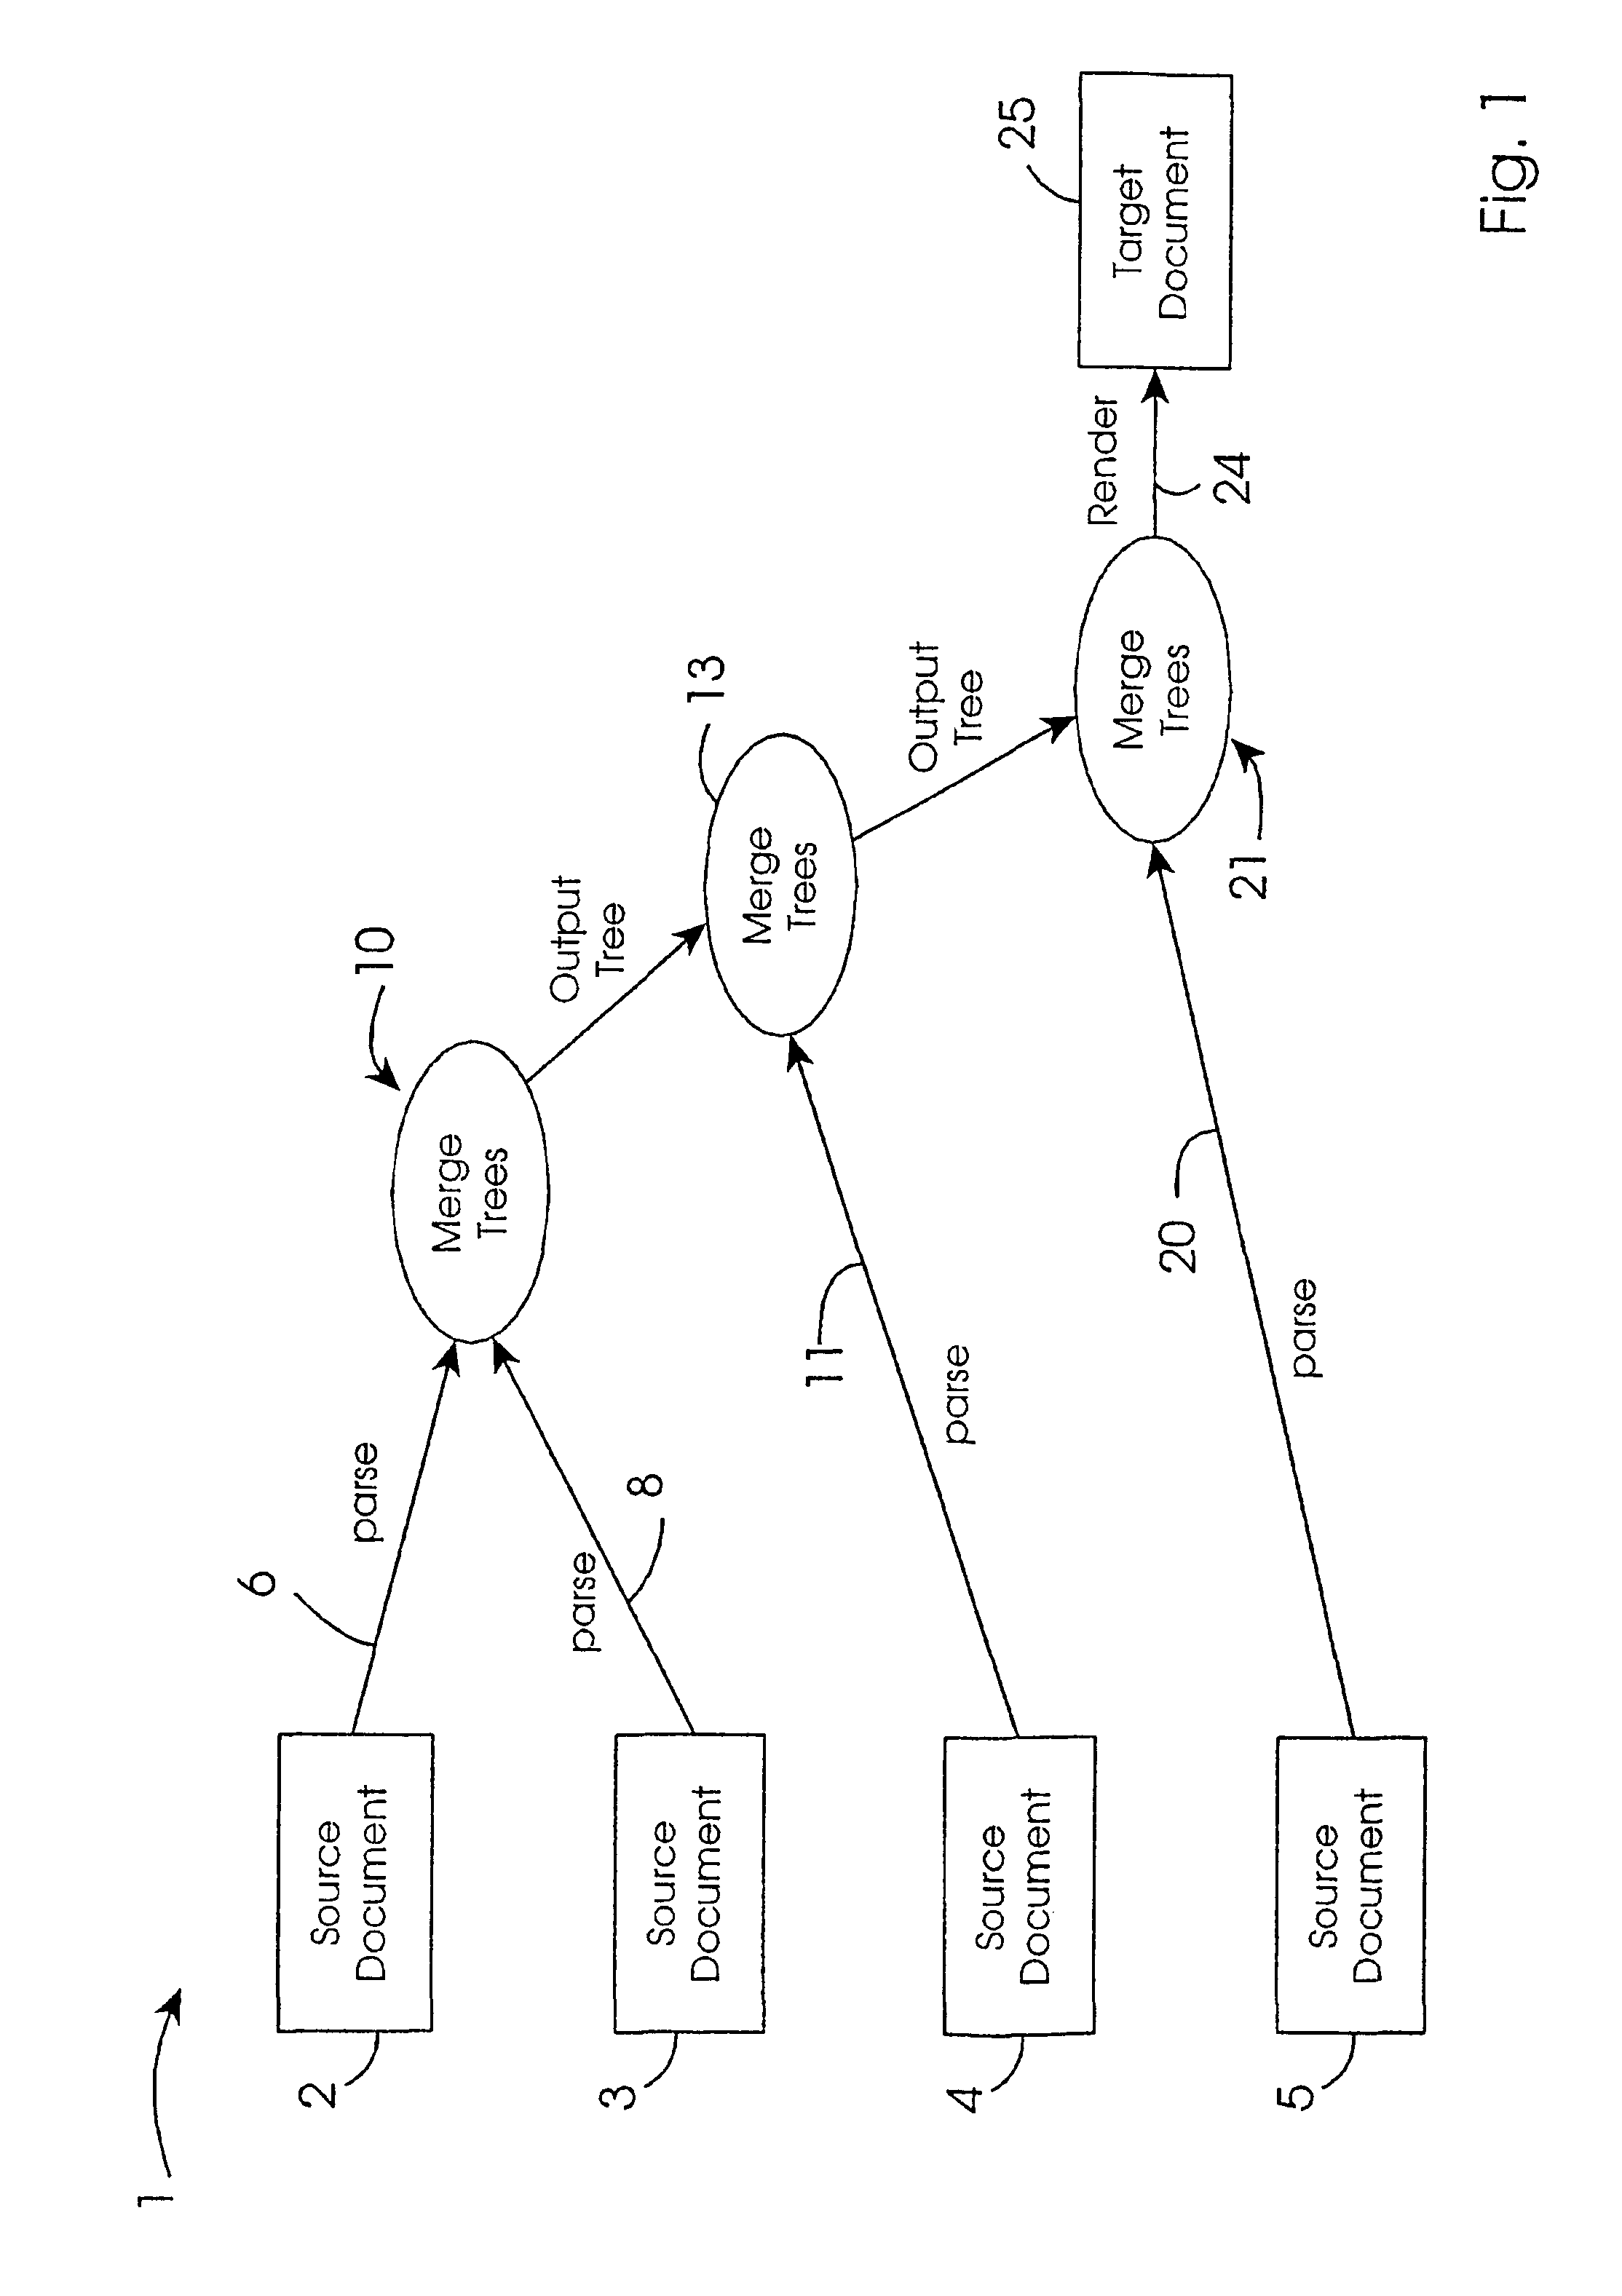 Electronic document processing system and method for merging source documents on a node-by-node basis to generate a target document